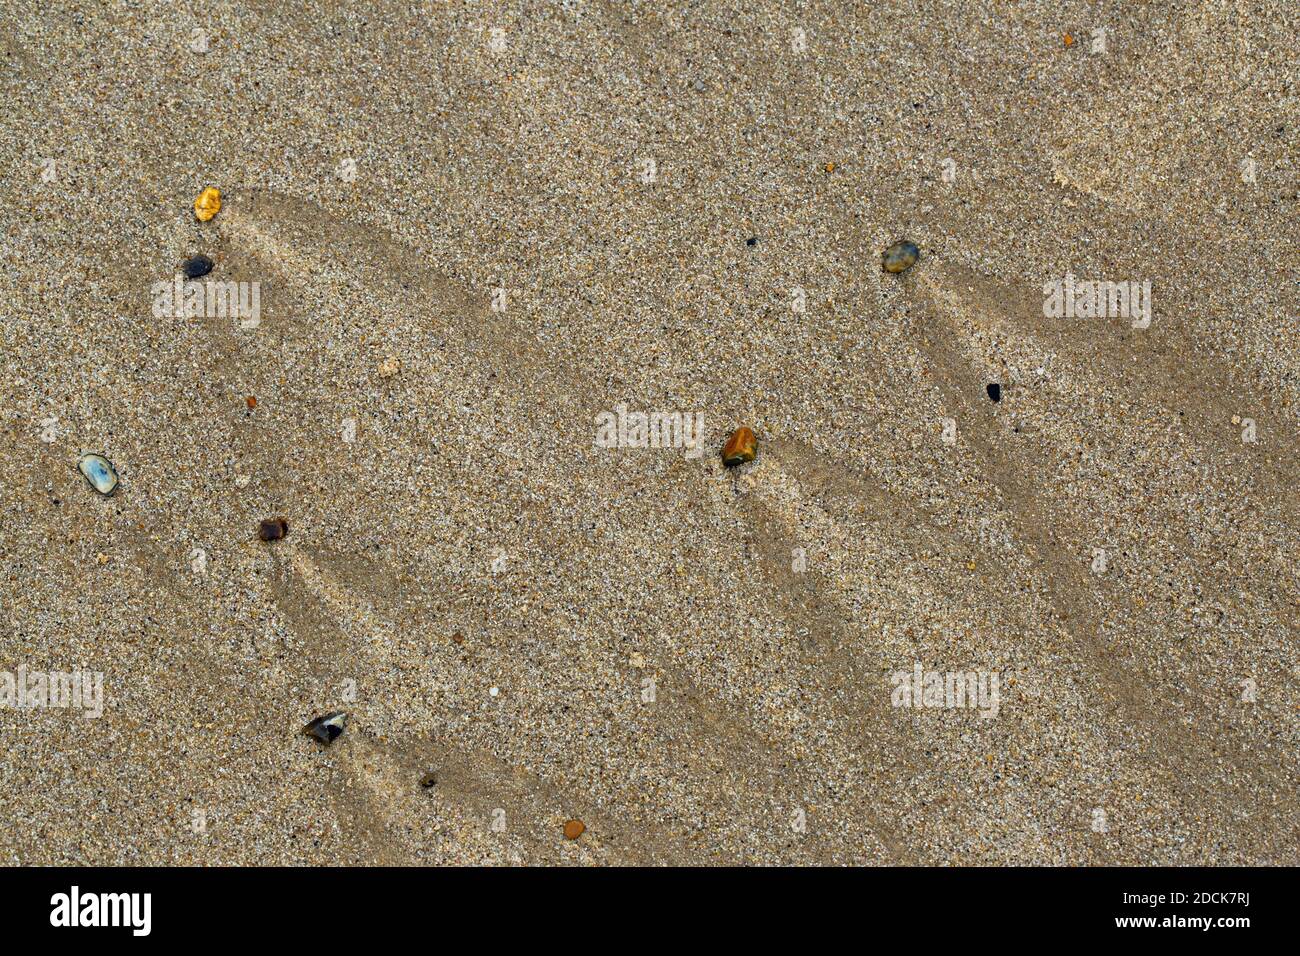 Small flint pebbles, midst coastal sea washed sand. Retreating tide markings left in surface causing directional arrow head shapes as the saltwater Stock Photo